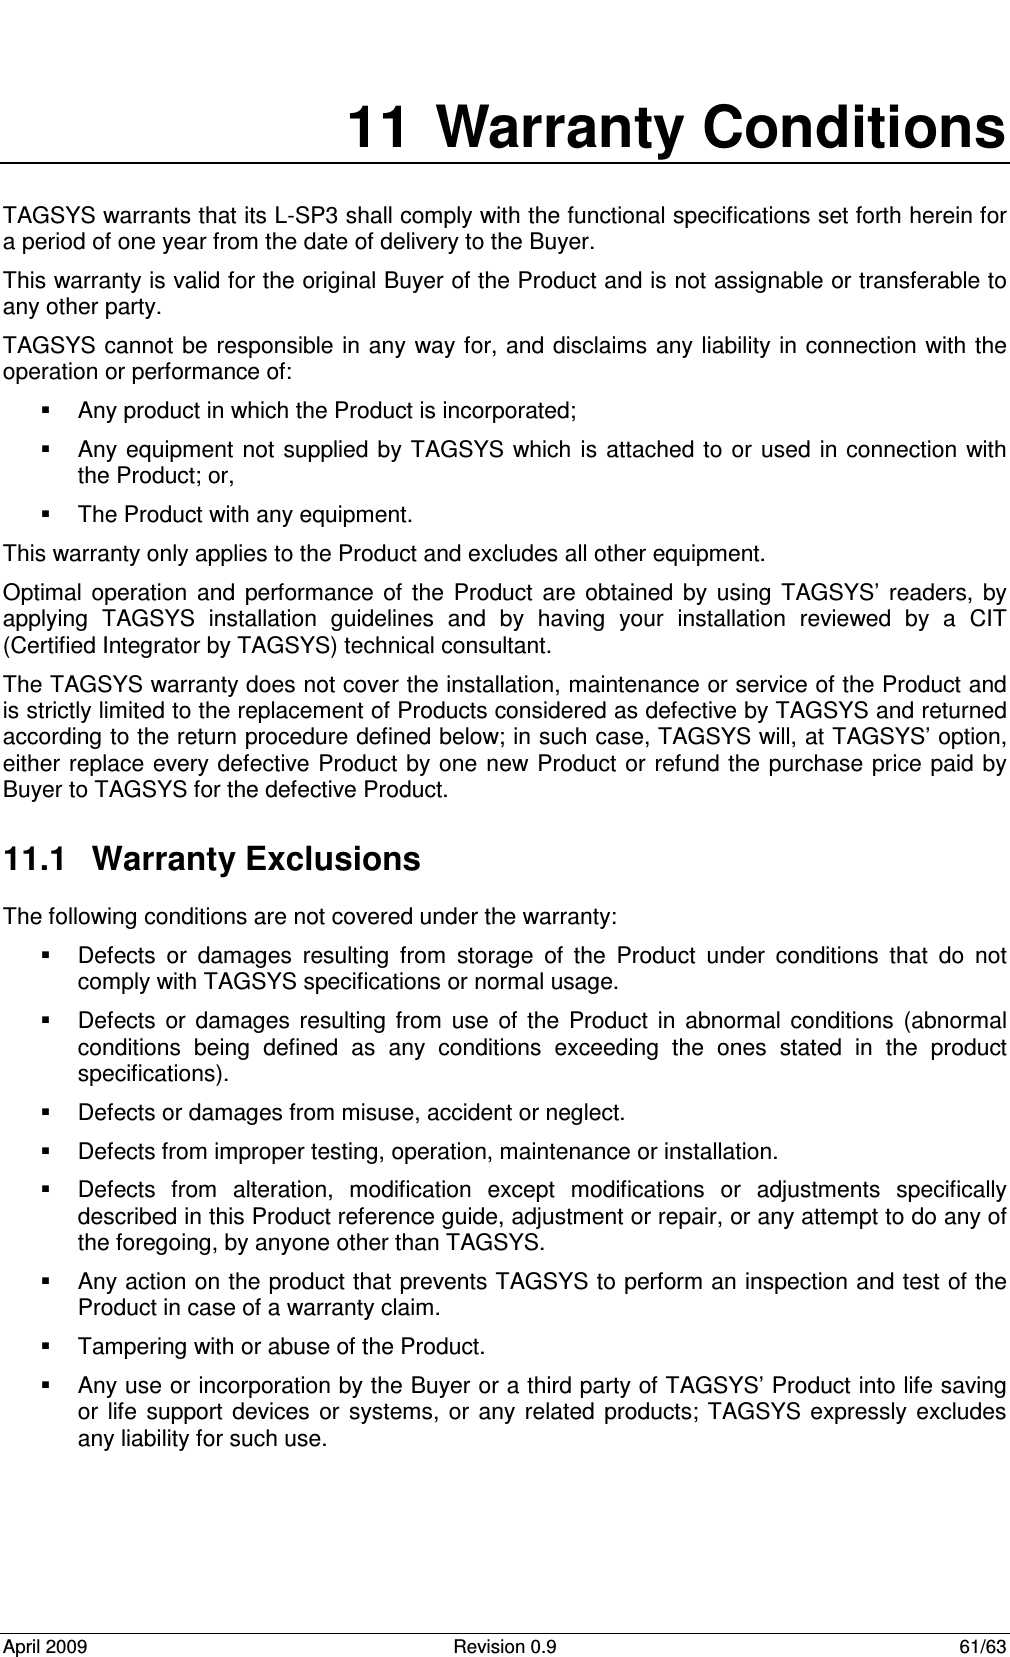  April 2009  Revision 0.9  61/63 11  Warranty Conditions TAGSYS warrants that its L-SP3 shall comply with the functional specifications set forth herein for a period of one year from the date of delivery to the Buyer. This warranty is valid for the original Buyer of the Product and is not assignable or transferable to any other party. TAGSYS cannot  be responsible in  any way for, and disclaims any liability in connection  with the operation or performance of:   Any product in which the Product is incorporated;   Any equipment  not supplied by TAGSYS which  is attached to or used  in connection  with the Product; or,   The Product with any equipment. This warranty only applies to the Product and excludes all other equipment. Optimal  operation  and  performance  of  the  Product  are  obtained  by  using  TAGSYS’  readers,  by applying  TAGSYS  installation  guidelines  and  by  having  your  installation  reviewed  by  a  CIT (Certified Integrator by TAGSYS) technical consultant. The TAGSYS warranty does not cover the installation, maintenance or service of the Product and is strictly limited to the replacement of Products considered as defective by TAGSYS and returned according to the return procedure defined below; in such case, TAGSYS will, at TAGSYS’ option, either replace every defective Product  by one new Product or  refund the purchase price paid by Buyer to TAGSYS for the defective Product. 11.1  Warranty Exclusions  The following conditions are not covered under the warranty:   Defects  or  damages  resulting  from  storage  of  the  Product  under  conditions  that  do  not comply with TAGSYS specifications or normal usage.   Defects  or  damages  resulting  from  use  of  the  Product  in  abnormal  conditions  (abnormal conditions  being  defined  as  any  conditions  exceeding  the  ones  stated  in  the  product specifications).   Defects or damages from misuse, accident or neglect.   Defects from improper testing, operation, maintenance or installation.   Defects  from  alteration,  modification  except  modifications  or  adjustments  specifically described in this Product reference guide, adjustment or repair, or any attempt to do any of the foregoing, by anyone other than TAGSYS.   Any action on the product that prevents TAGSYS to perform an inspection and test of the Product in case of a warranty claim.   Tampering with or abuse of the Product.   Any use or incorporation by the Buyer or a third party of TAGSYS’ Product into life saving or  life  support  devices  or  systems, or  any related  products; TAGSYS expressly  excludes any liability for such use. 